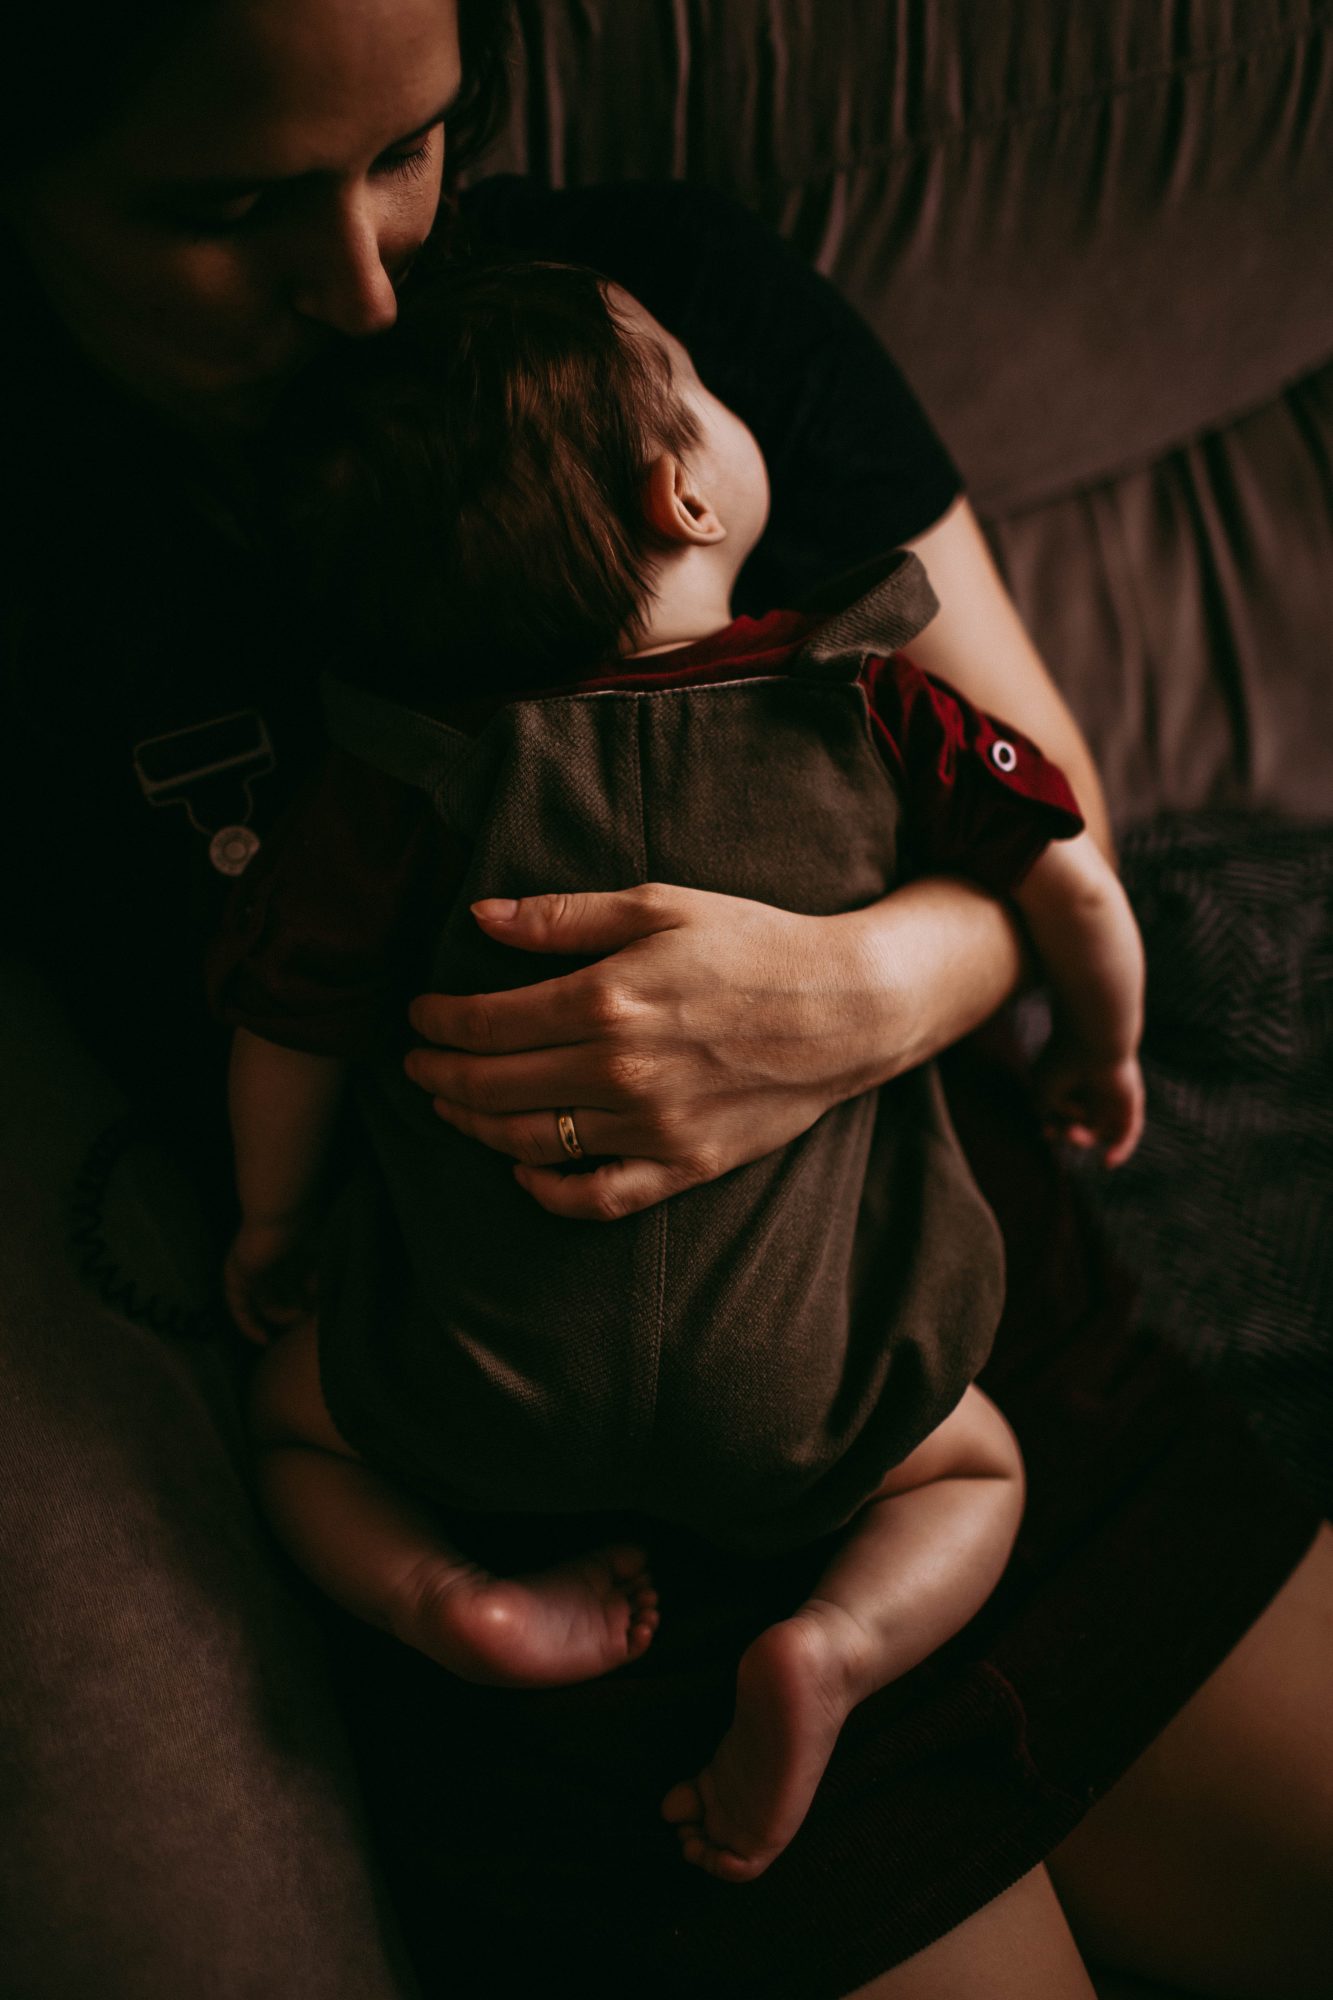 Shot of sleeping baby in an adult's arms